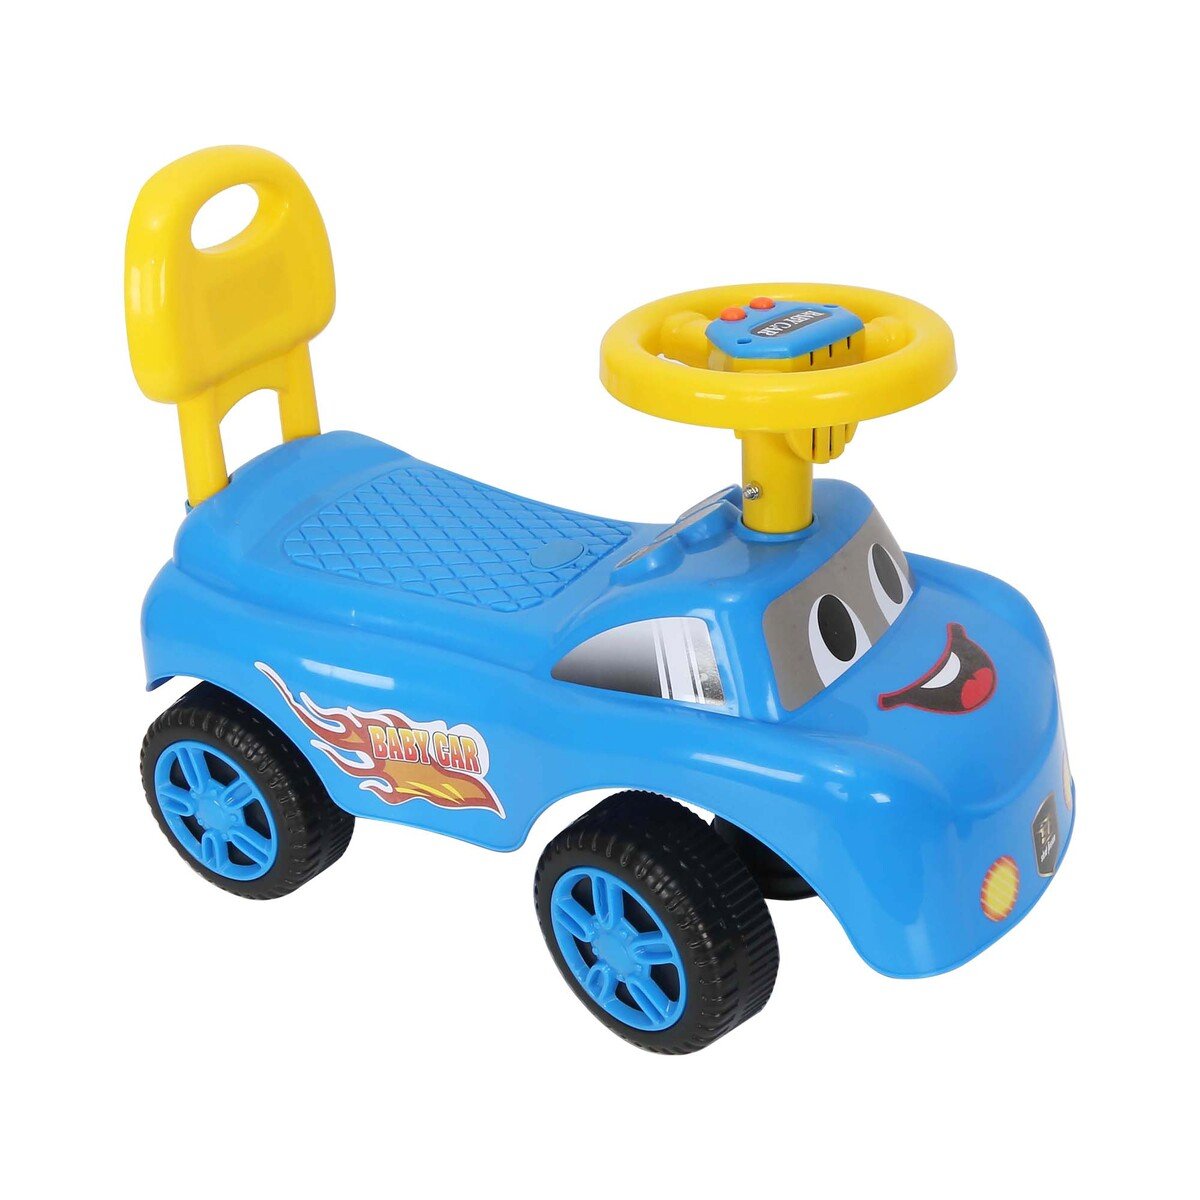 Skid Fusion Kids Ride On Car J-BC618A Color Assorted